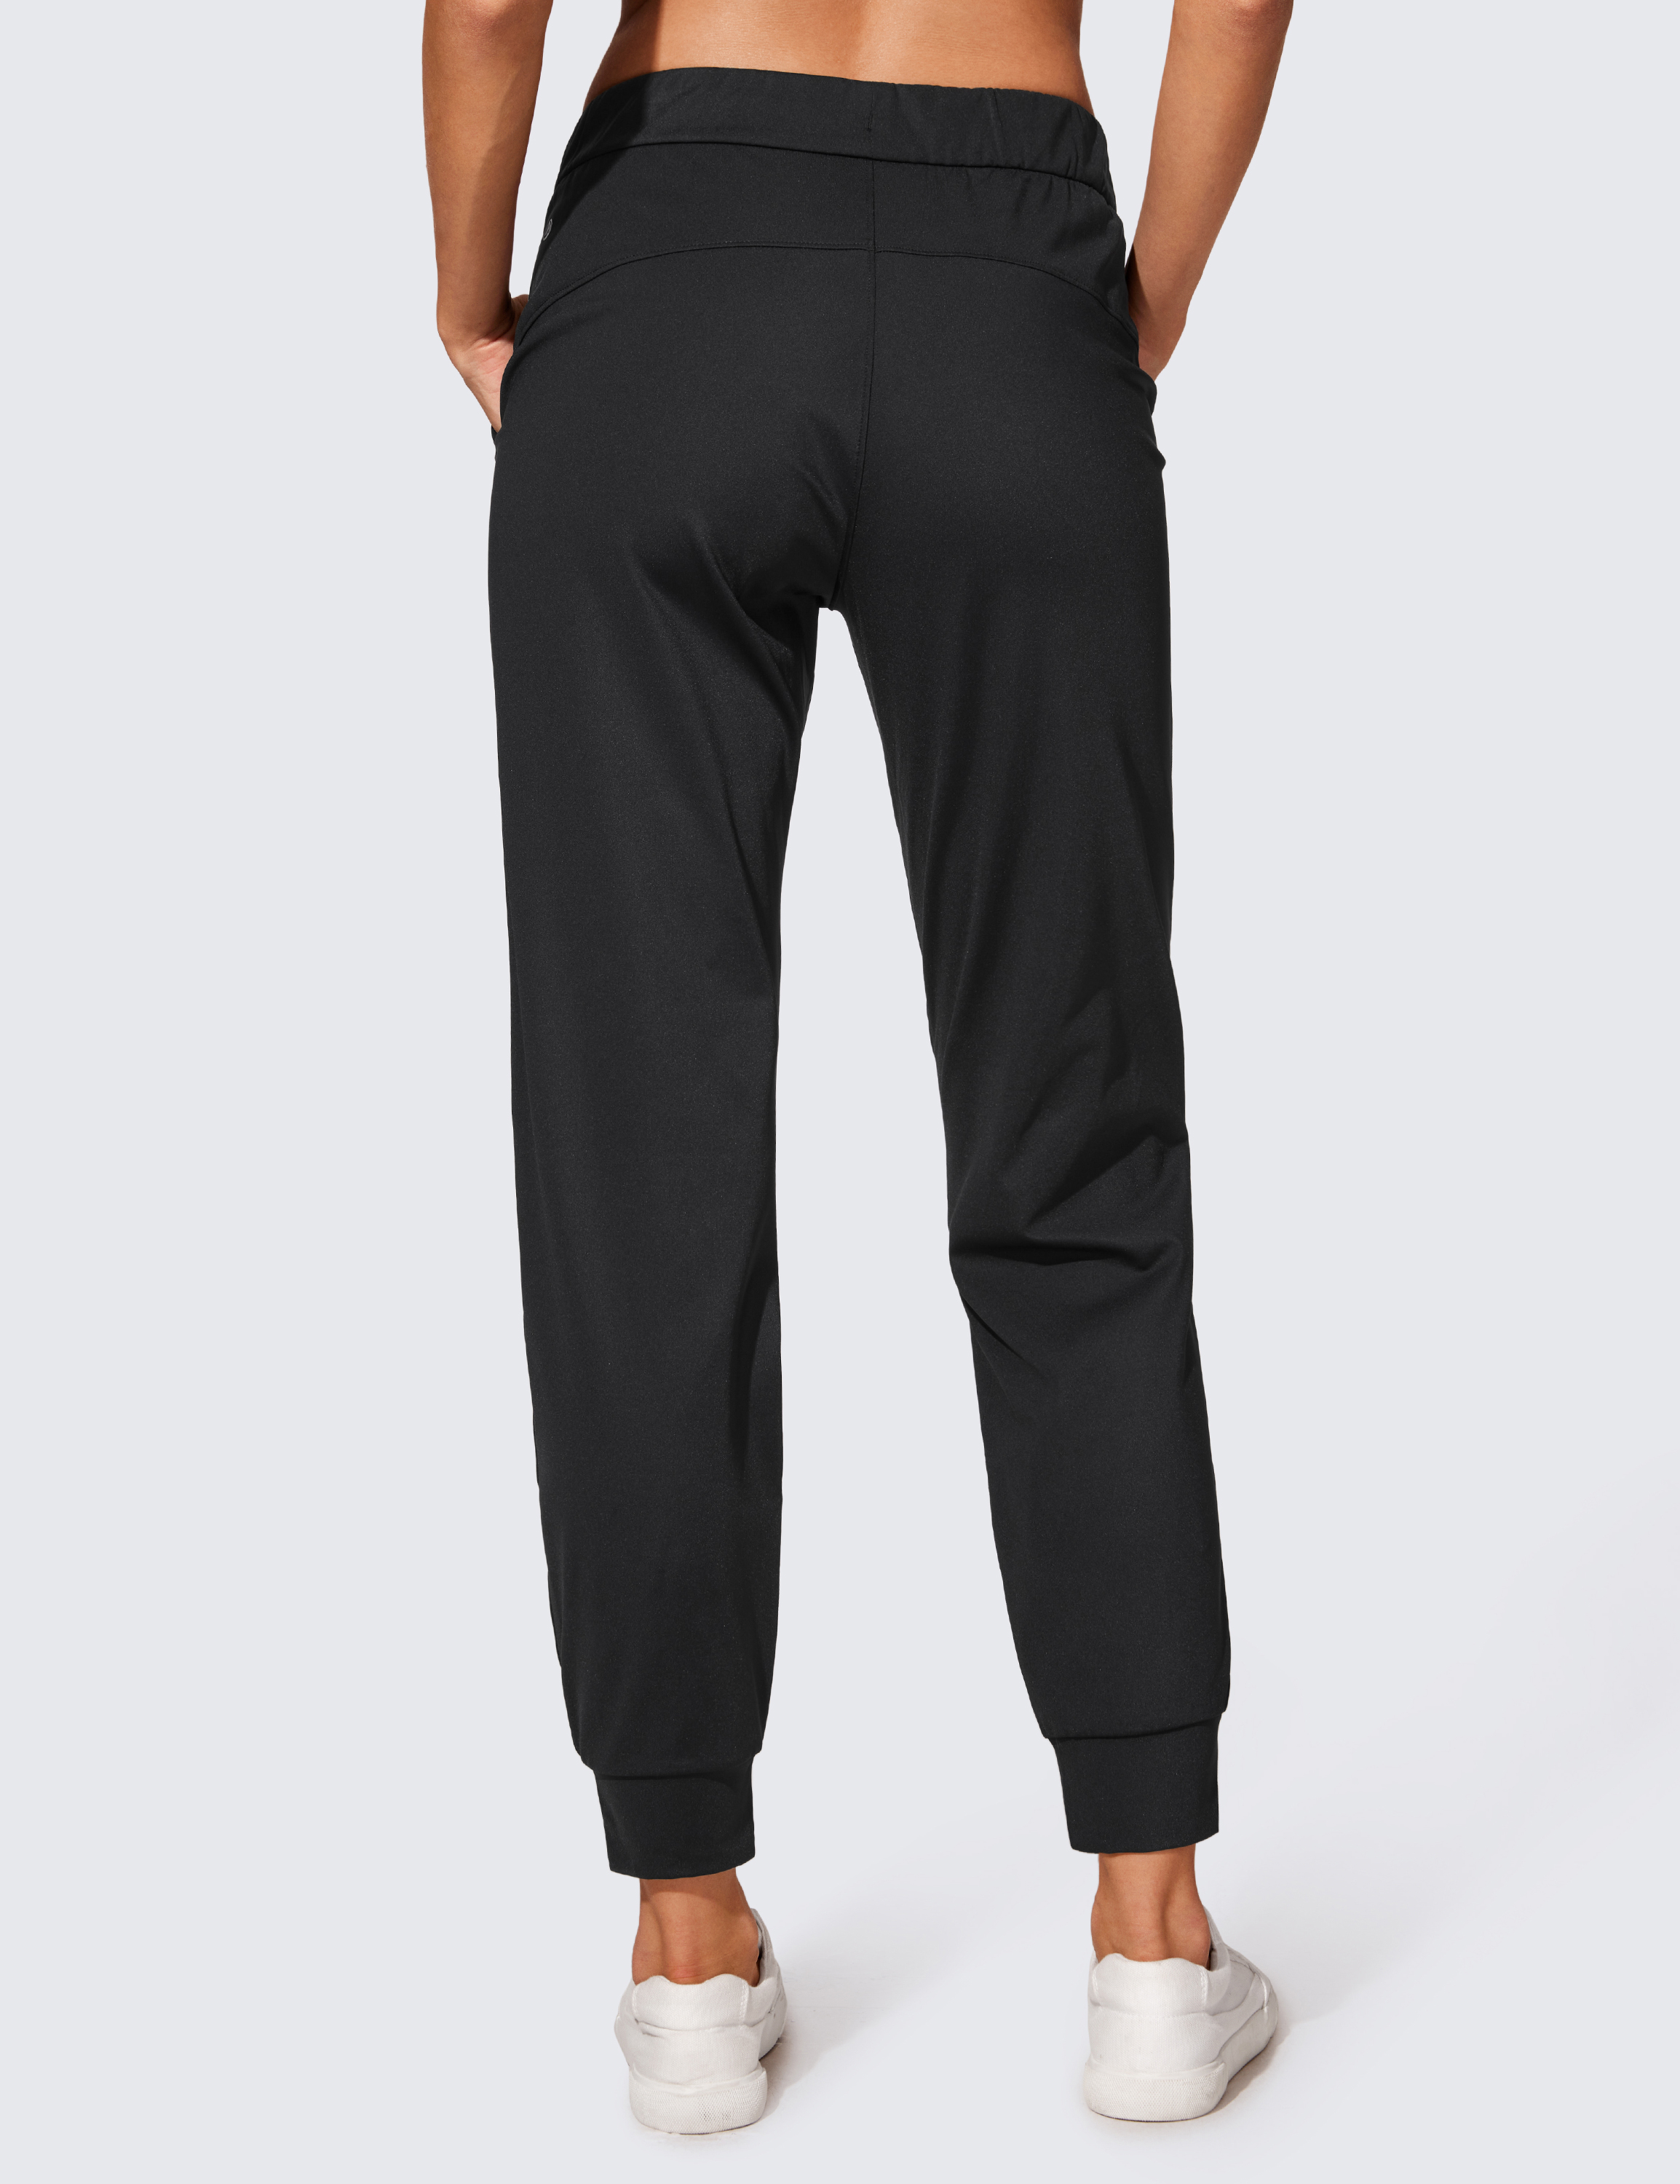 CRZ YOGA Women's High Rise 5-Pocket Golf Pants with Pockets 27